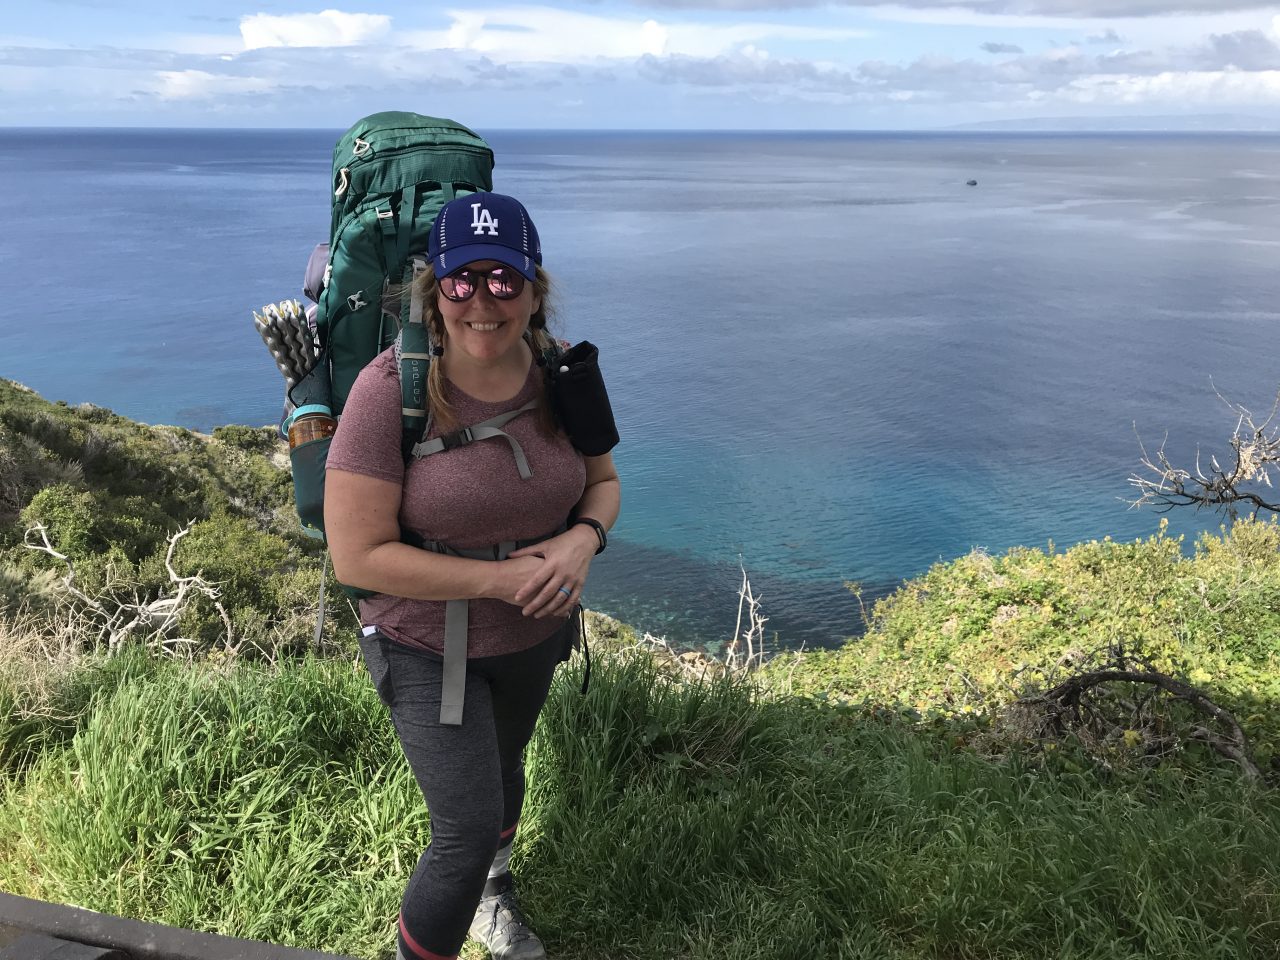 Backpacking on Catalina Island - A 3 Day Backpacking Trip